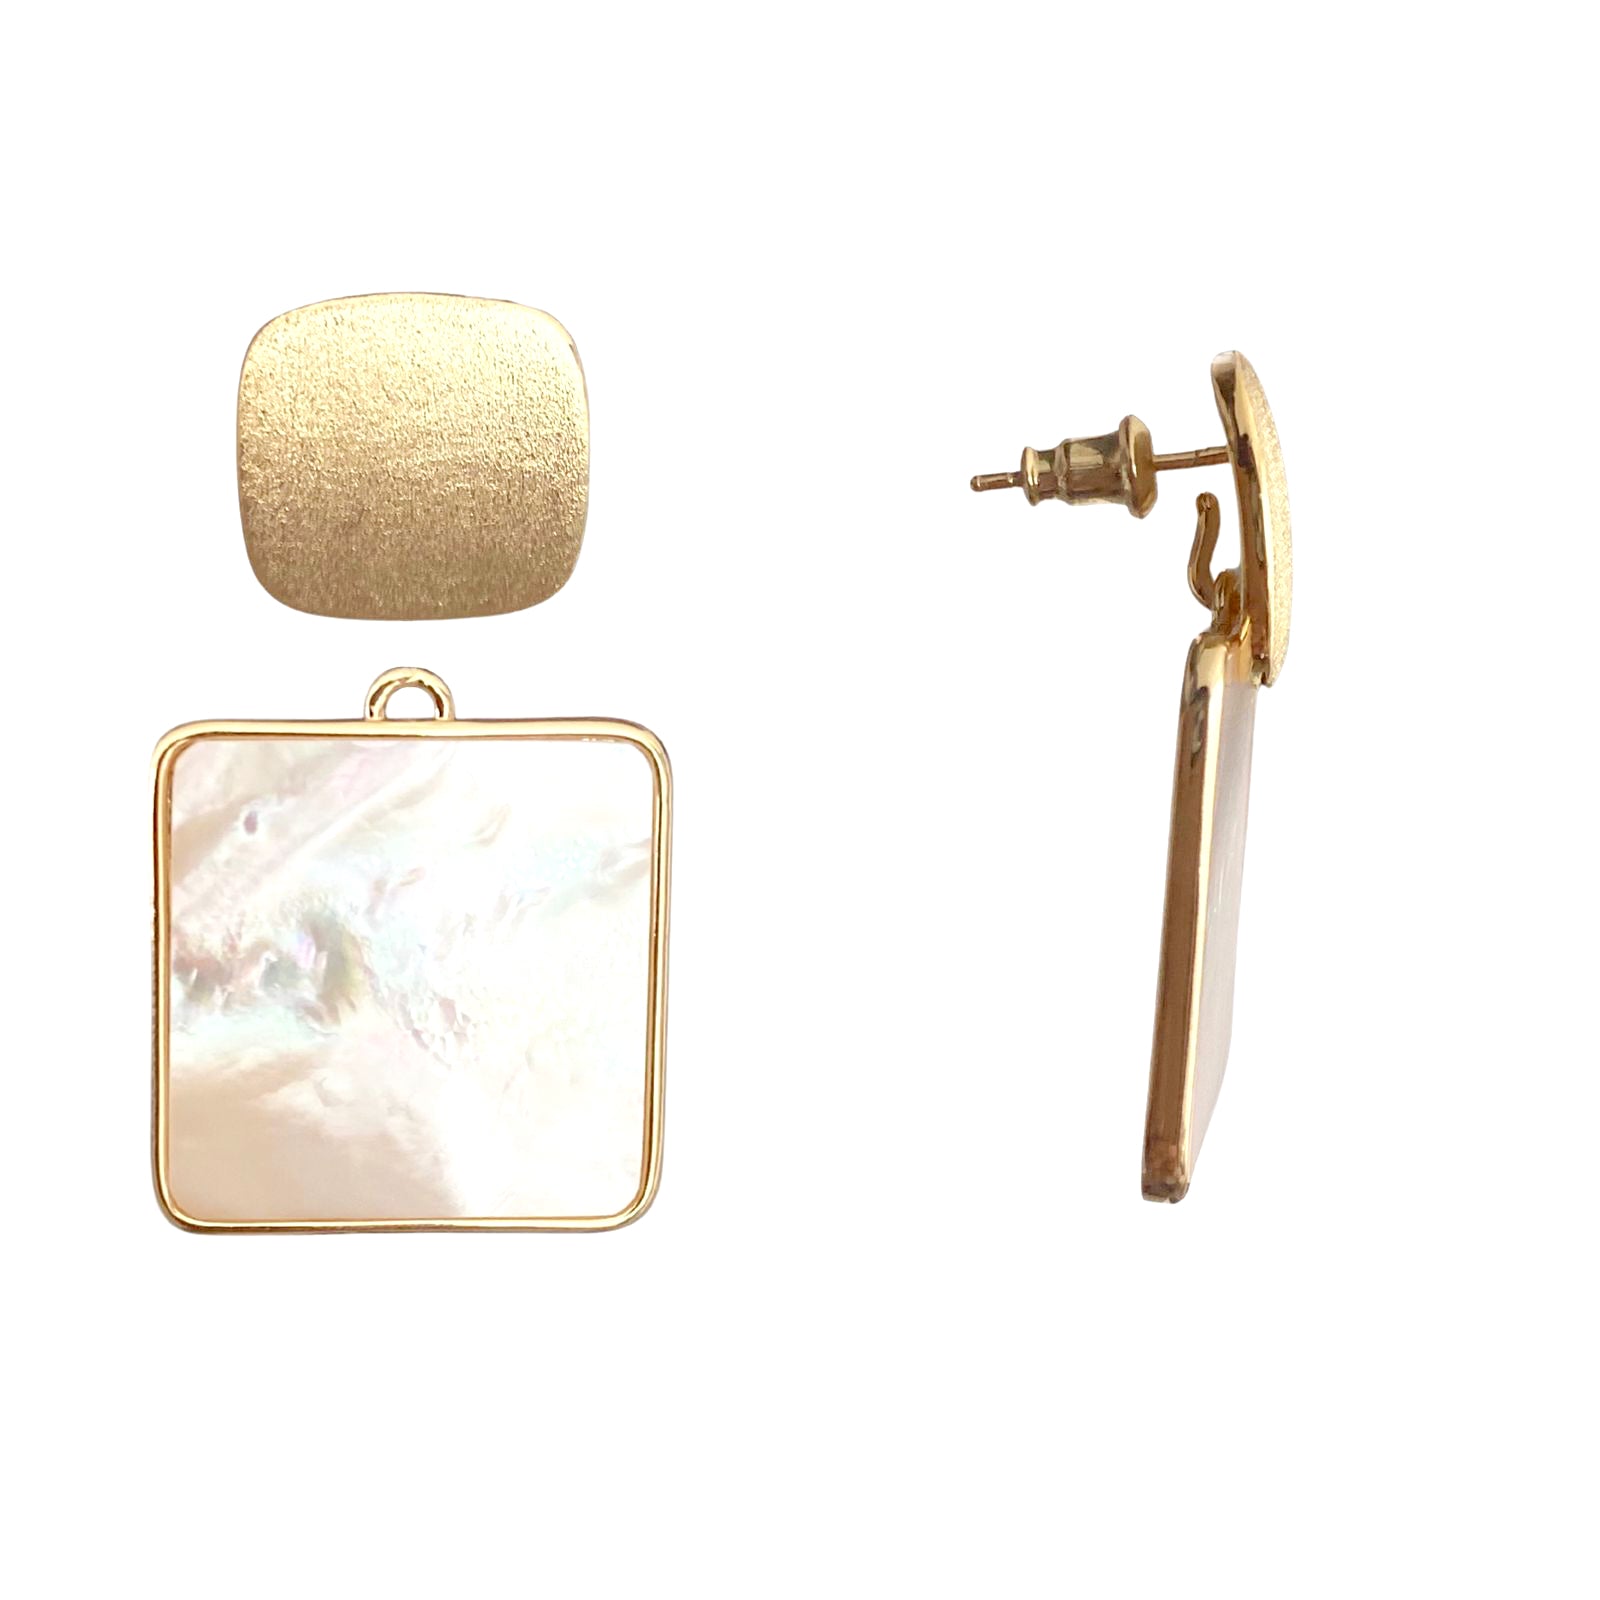 Square Earring, 18k, Gold Plated, Stainless Steel - Ibiza Passion